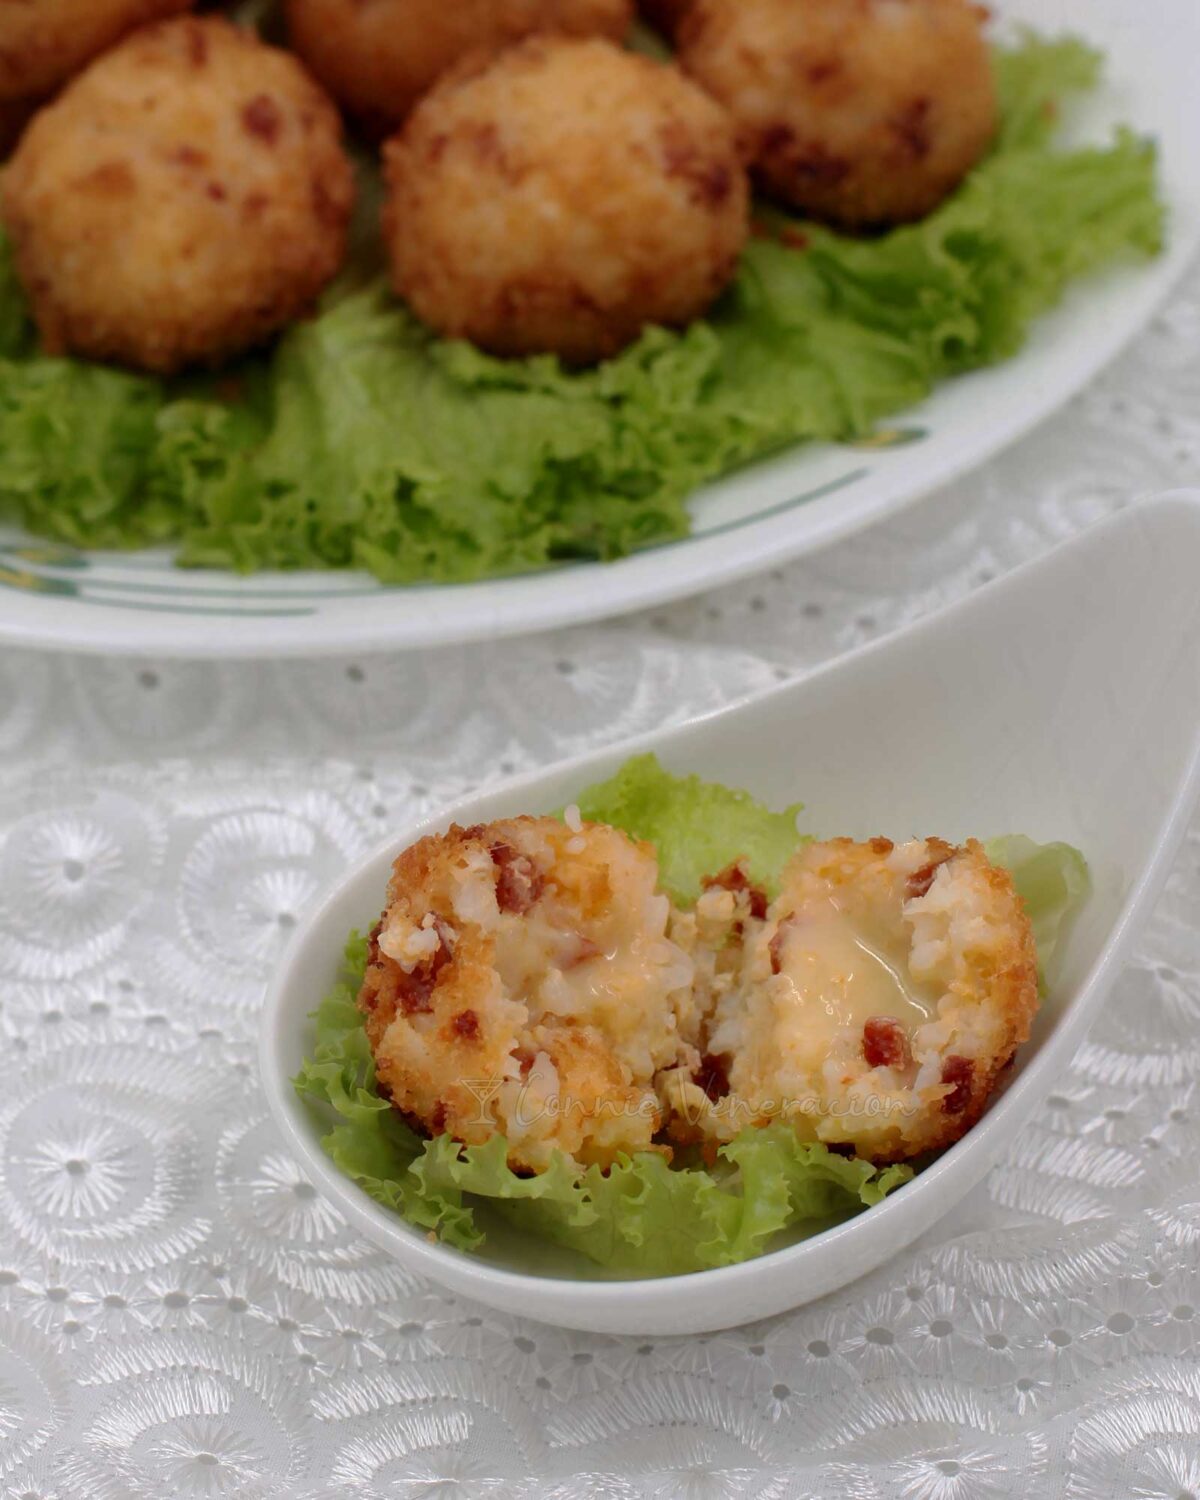 Fried cheese-stuffed sausage and rice balls